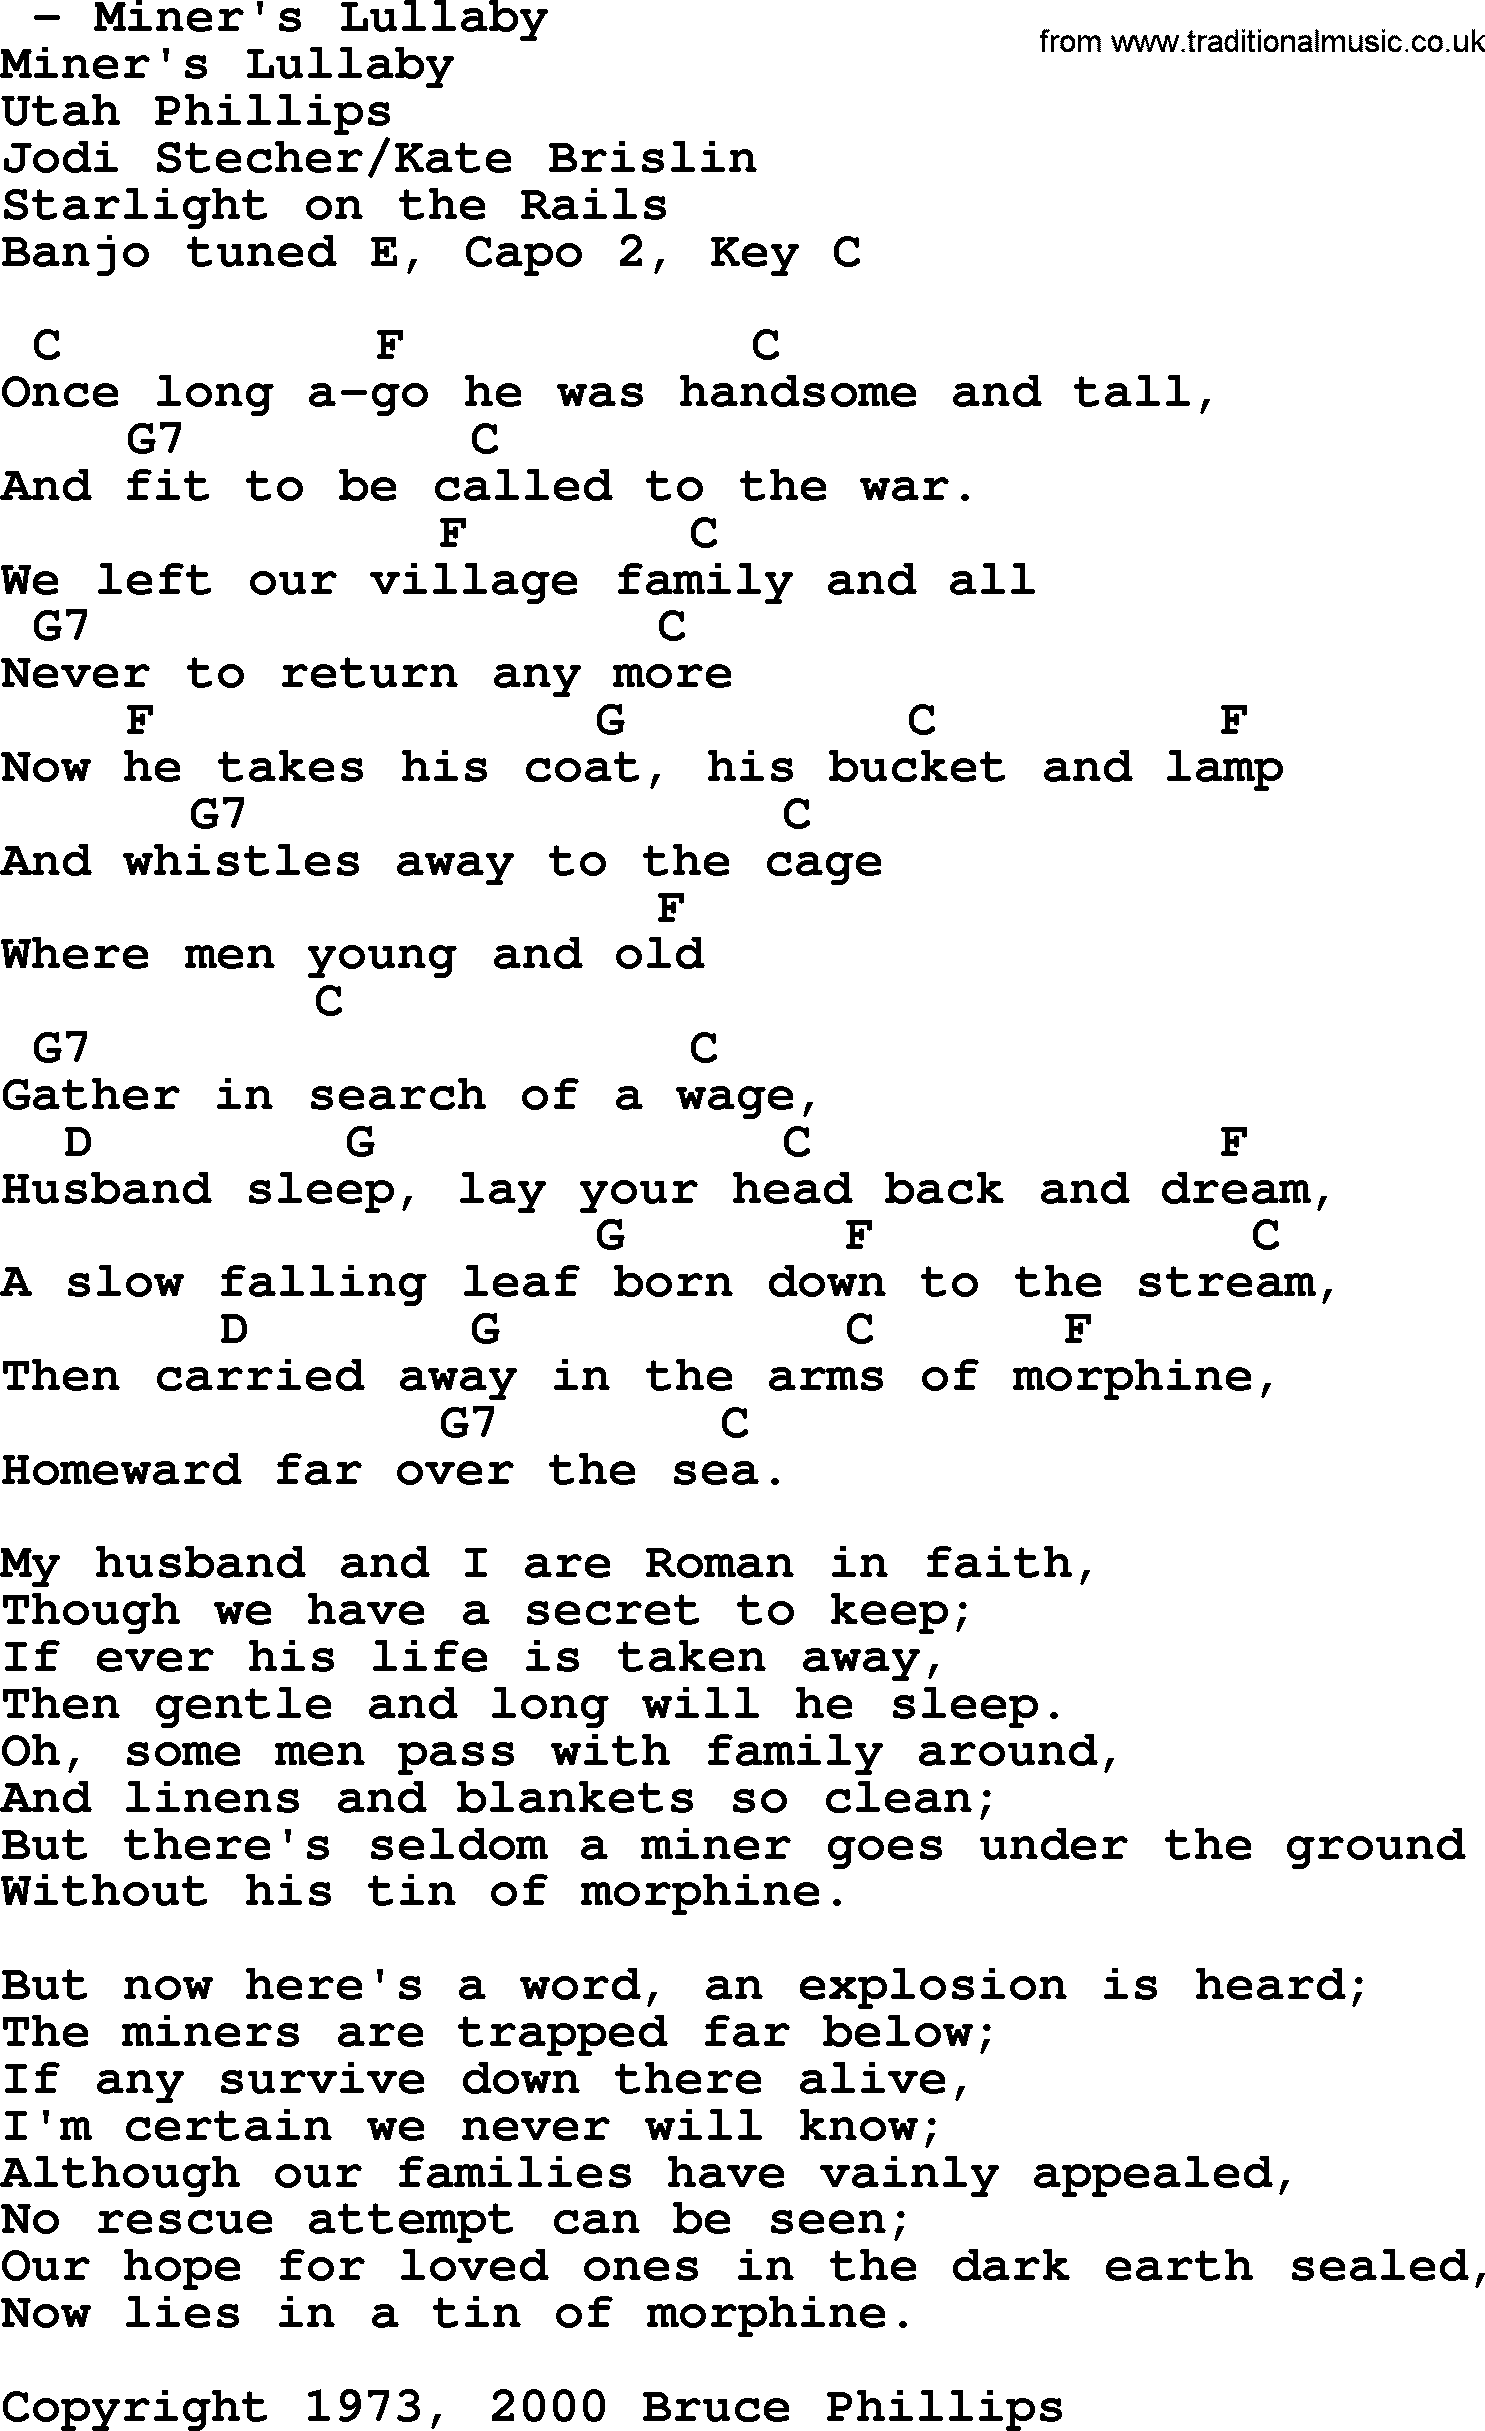 Bluegrass song: Miner's Lullaby, lyrics and chords